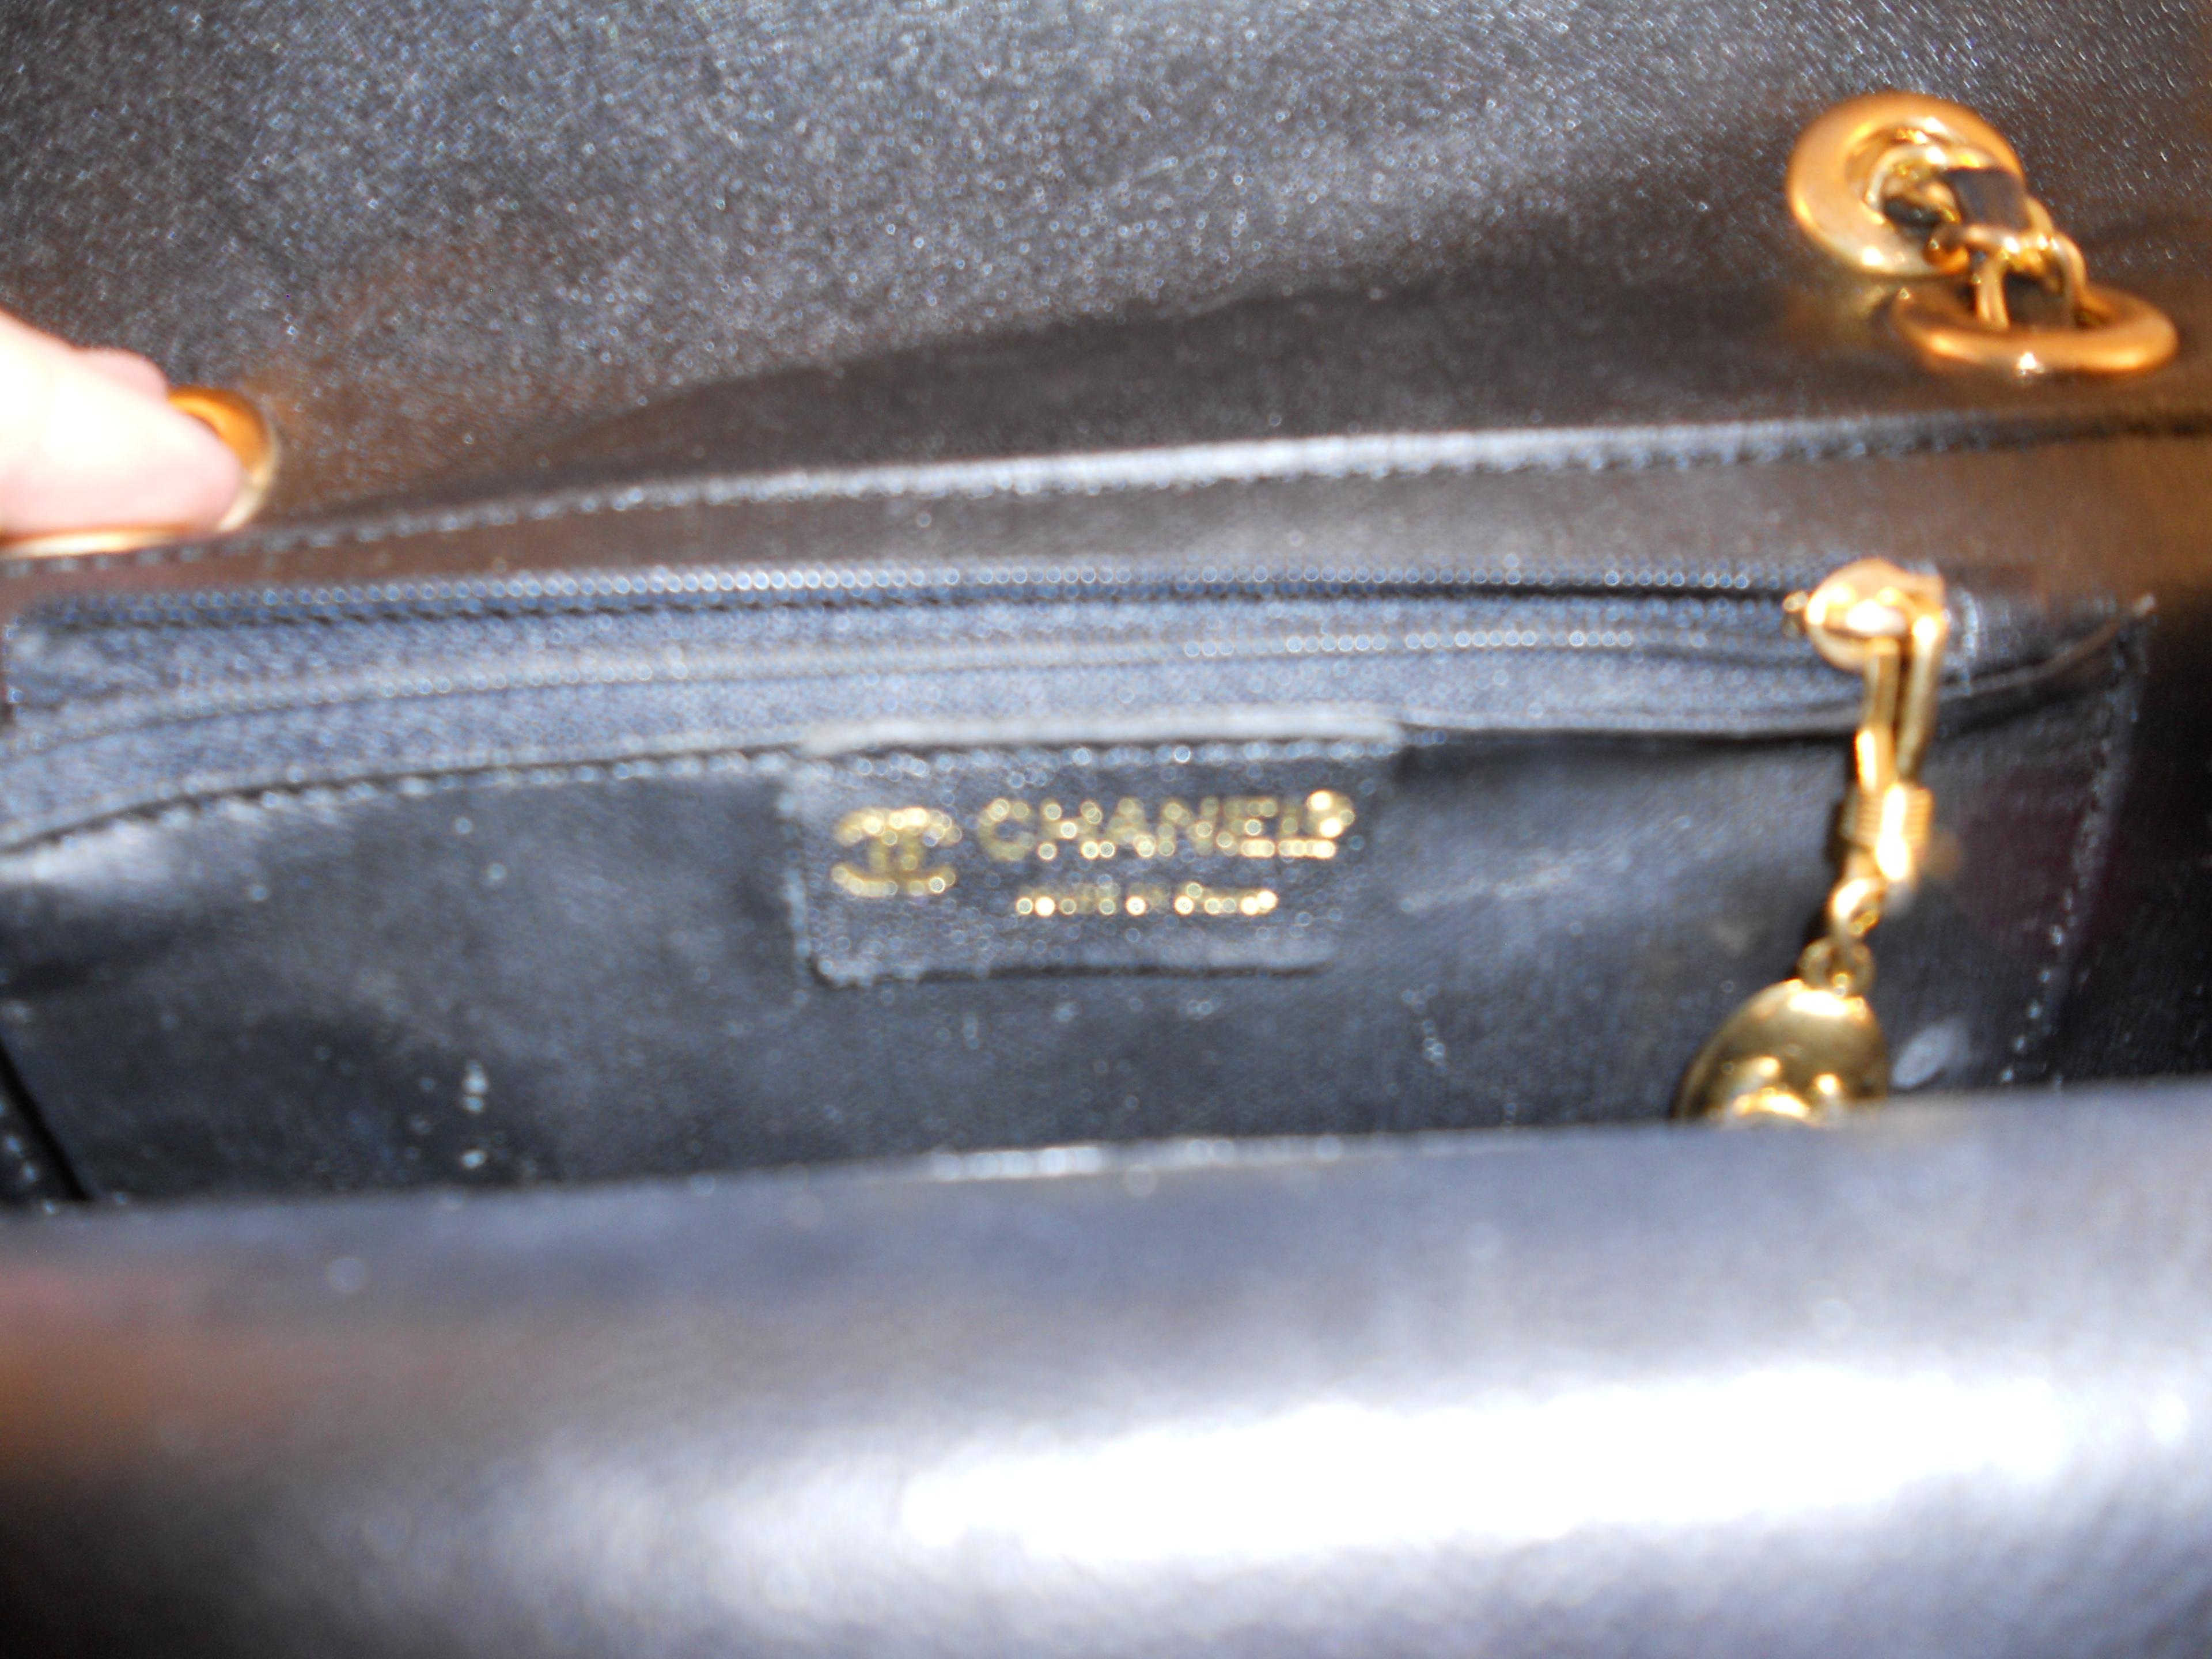 Vintage, Marked Chanel Leather Purse Not Authenticated